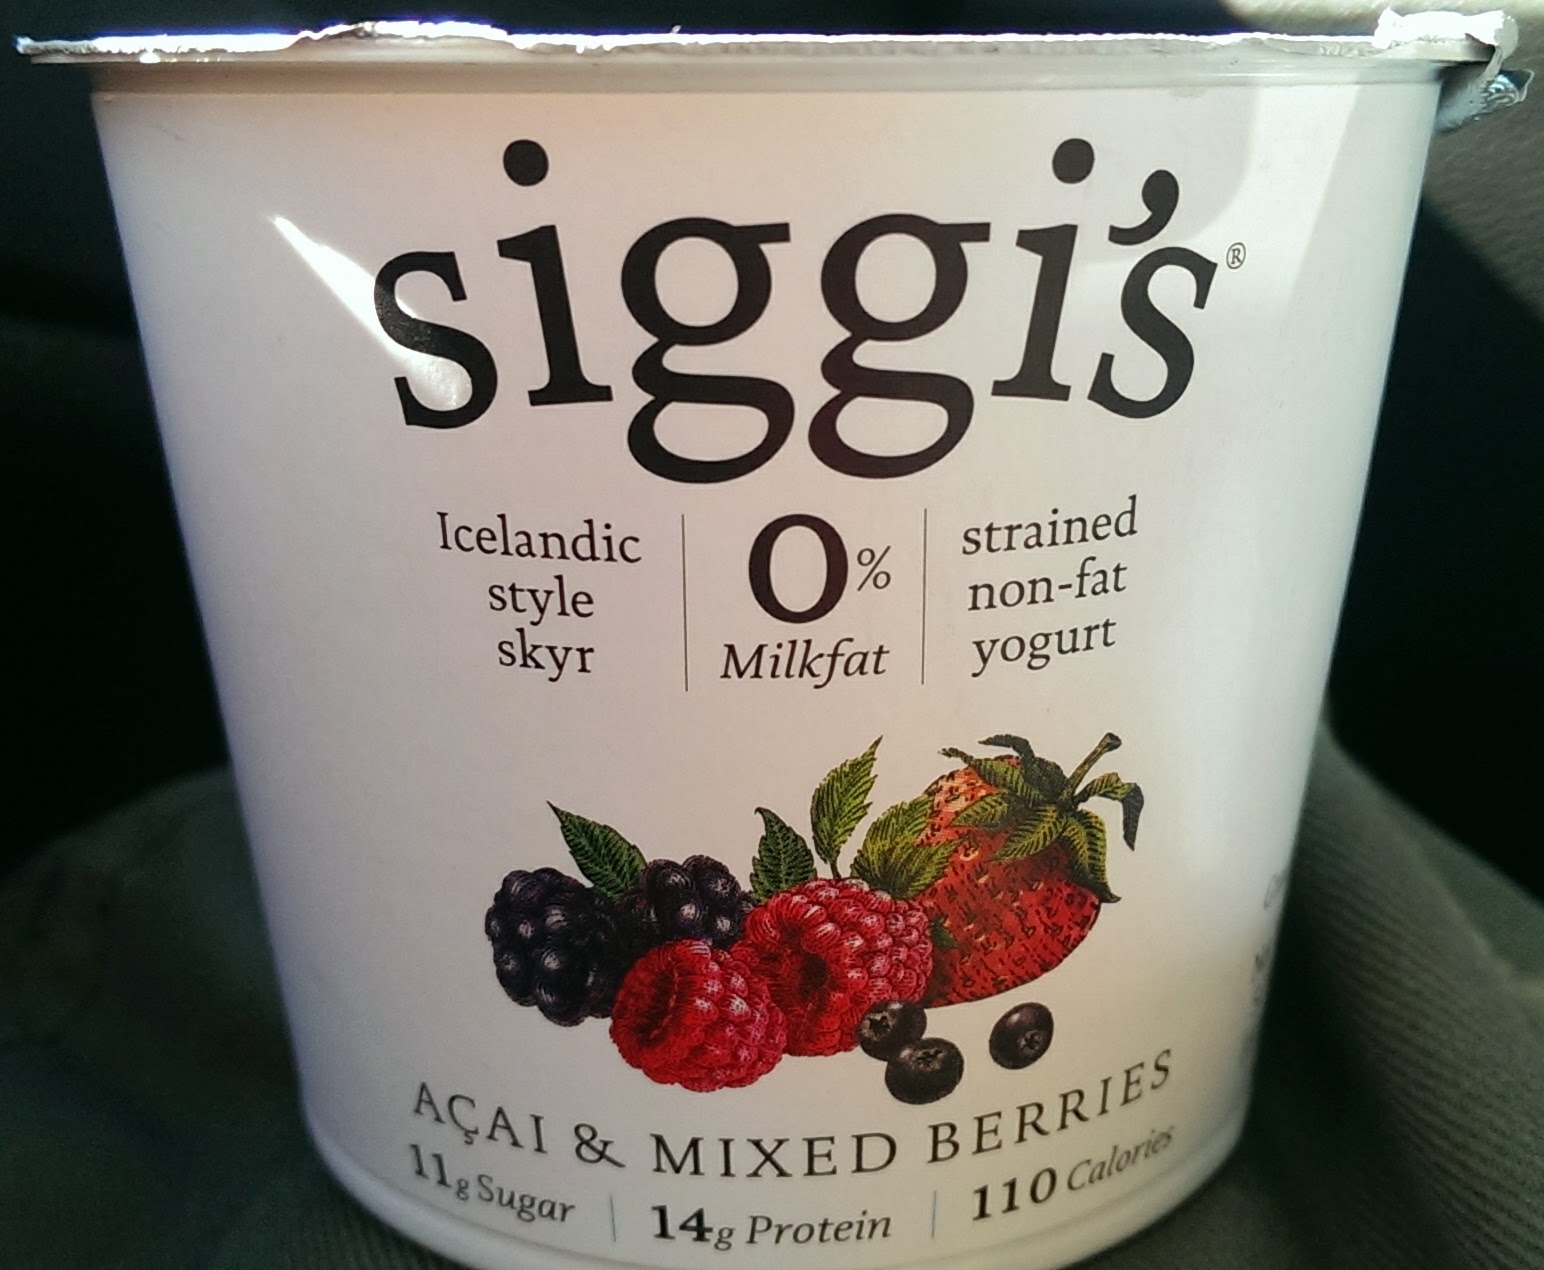 Siggis Start Off The New Year With Siggi's - Siggi's Review